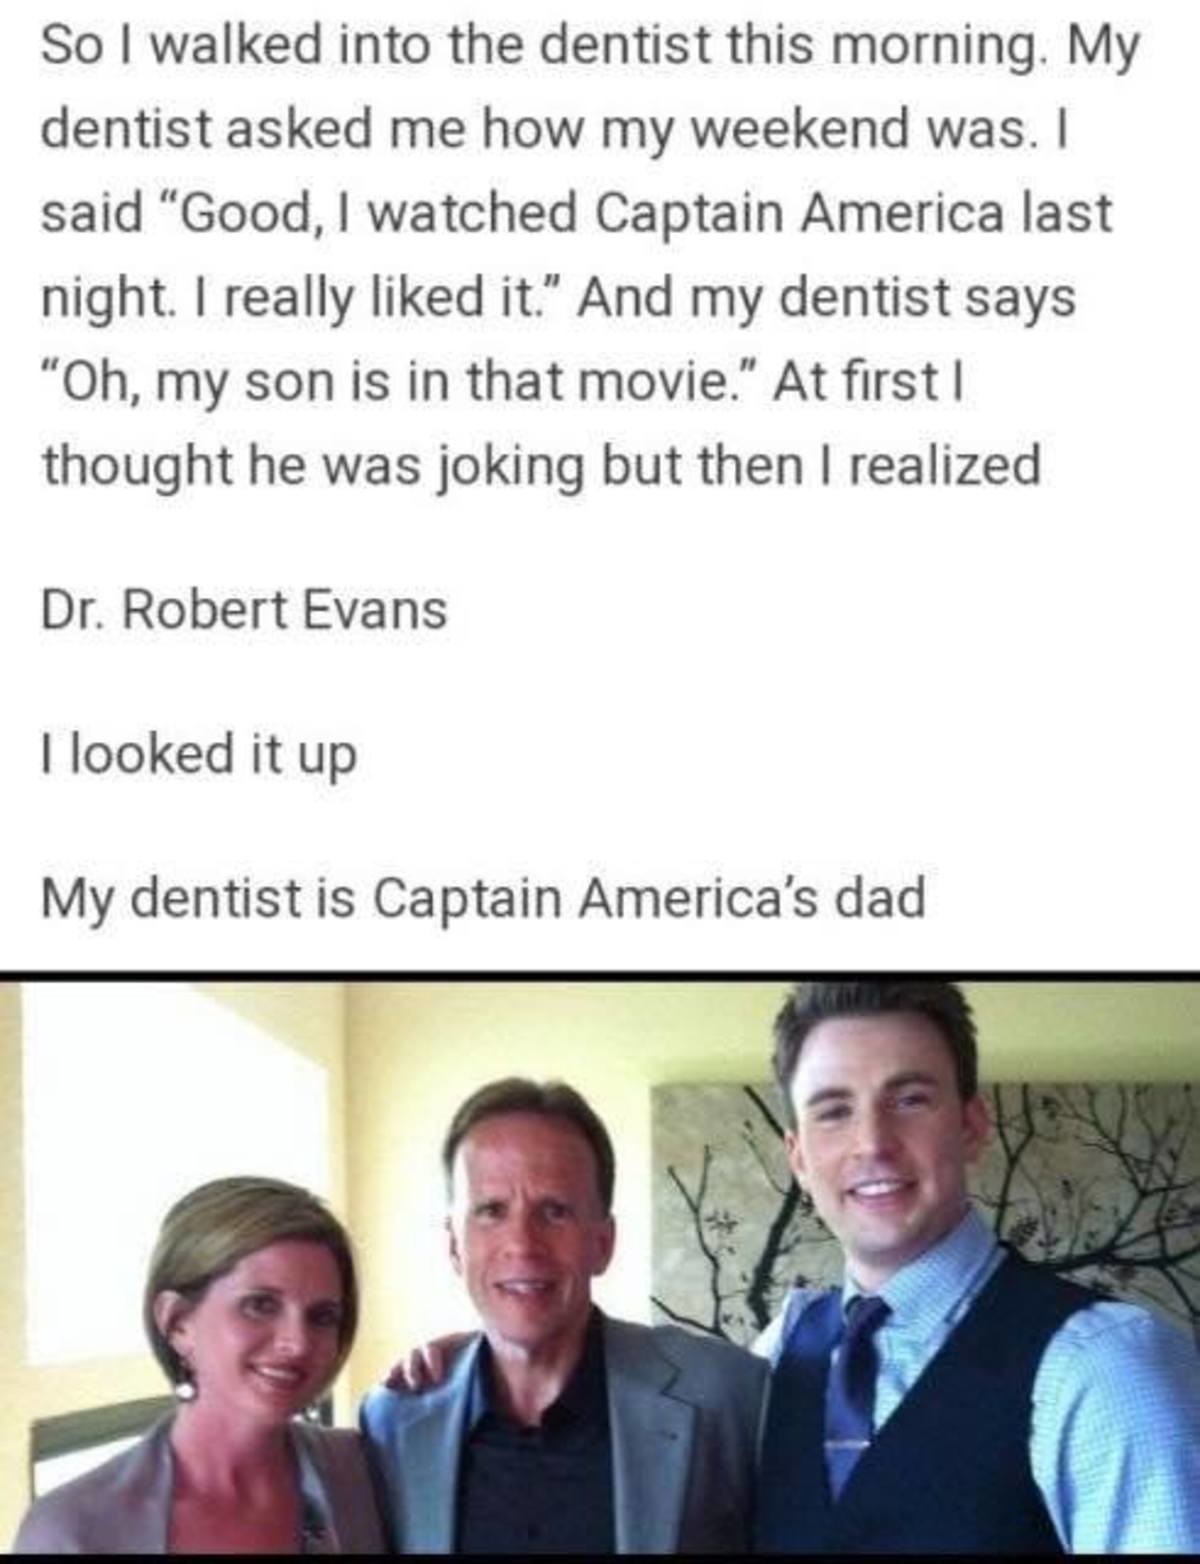 bumpy Moose. .. &gt;look up Chris Evans on Wikipedia &gt;see that his dad is a dentist &gt;make up a fake story about getting your teeth worked on by him &gt;??? &gt;Profit